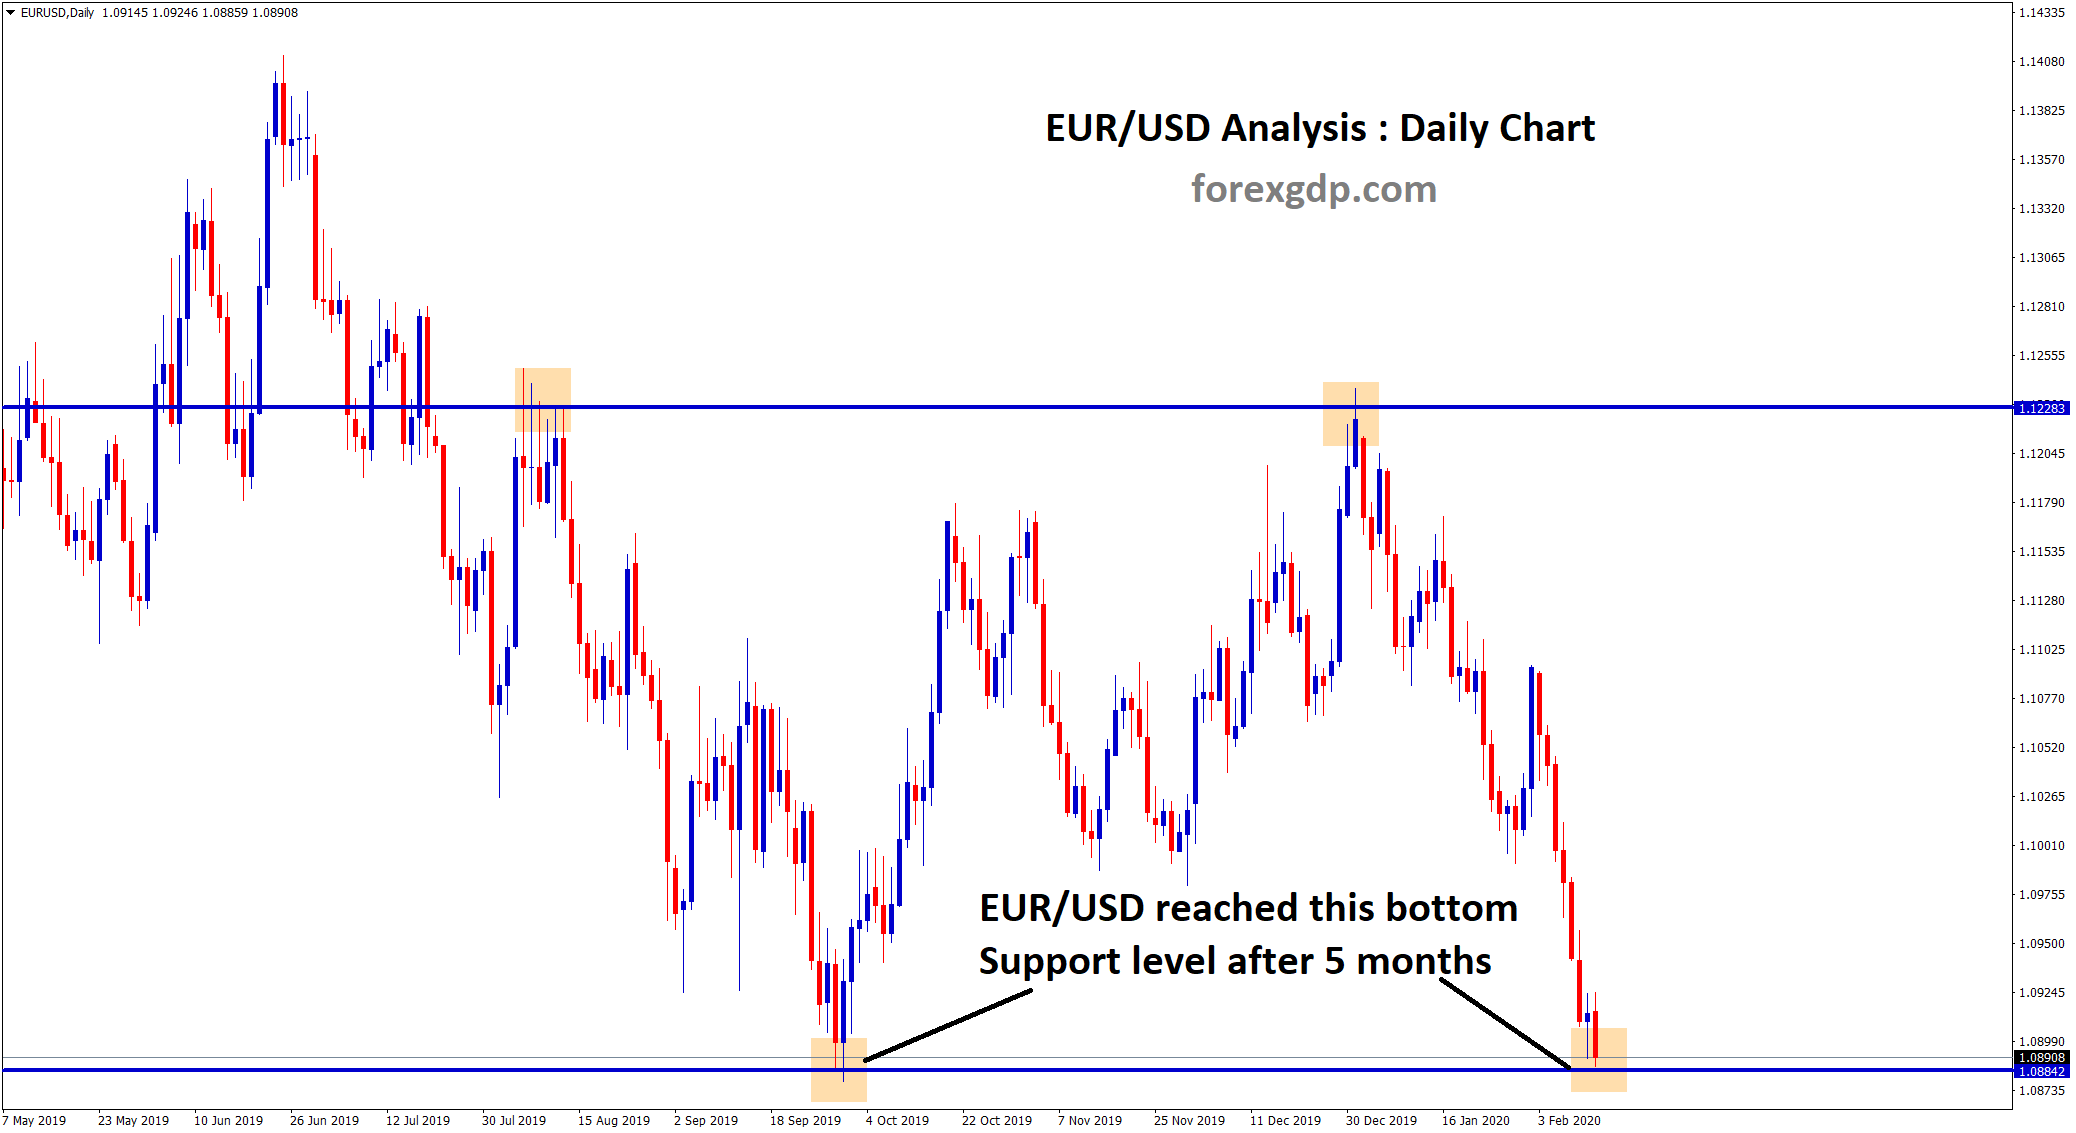 EUR USD reached the support level